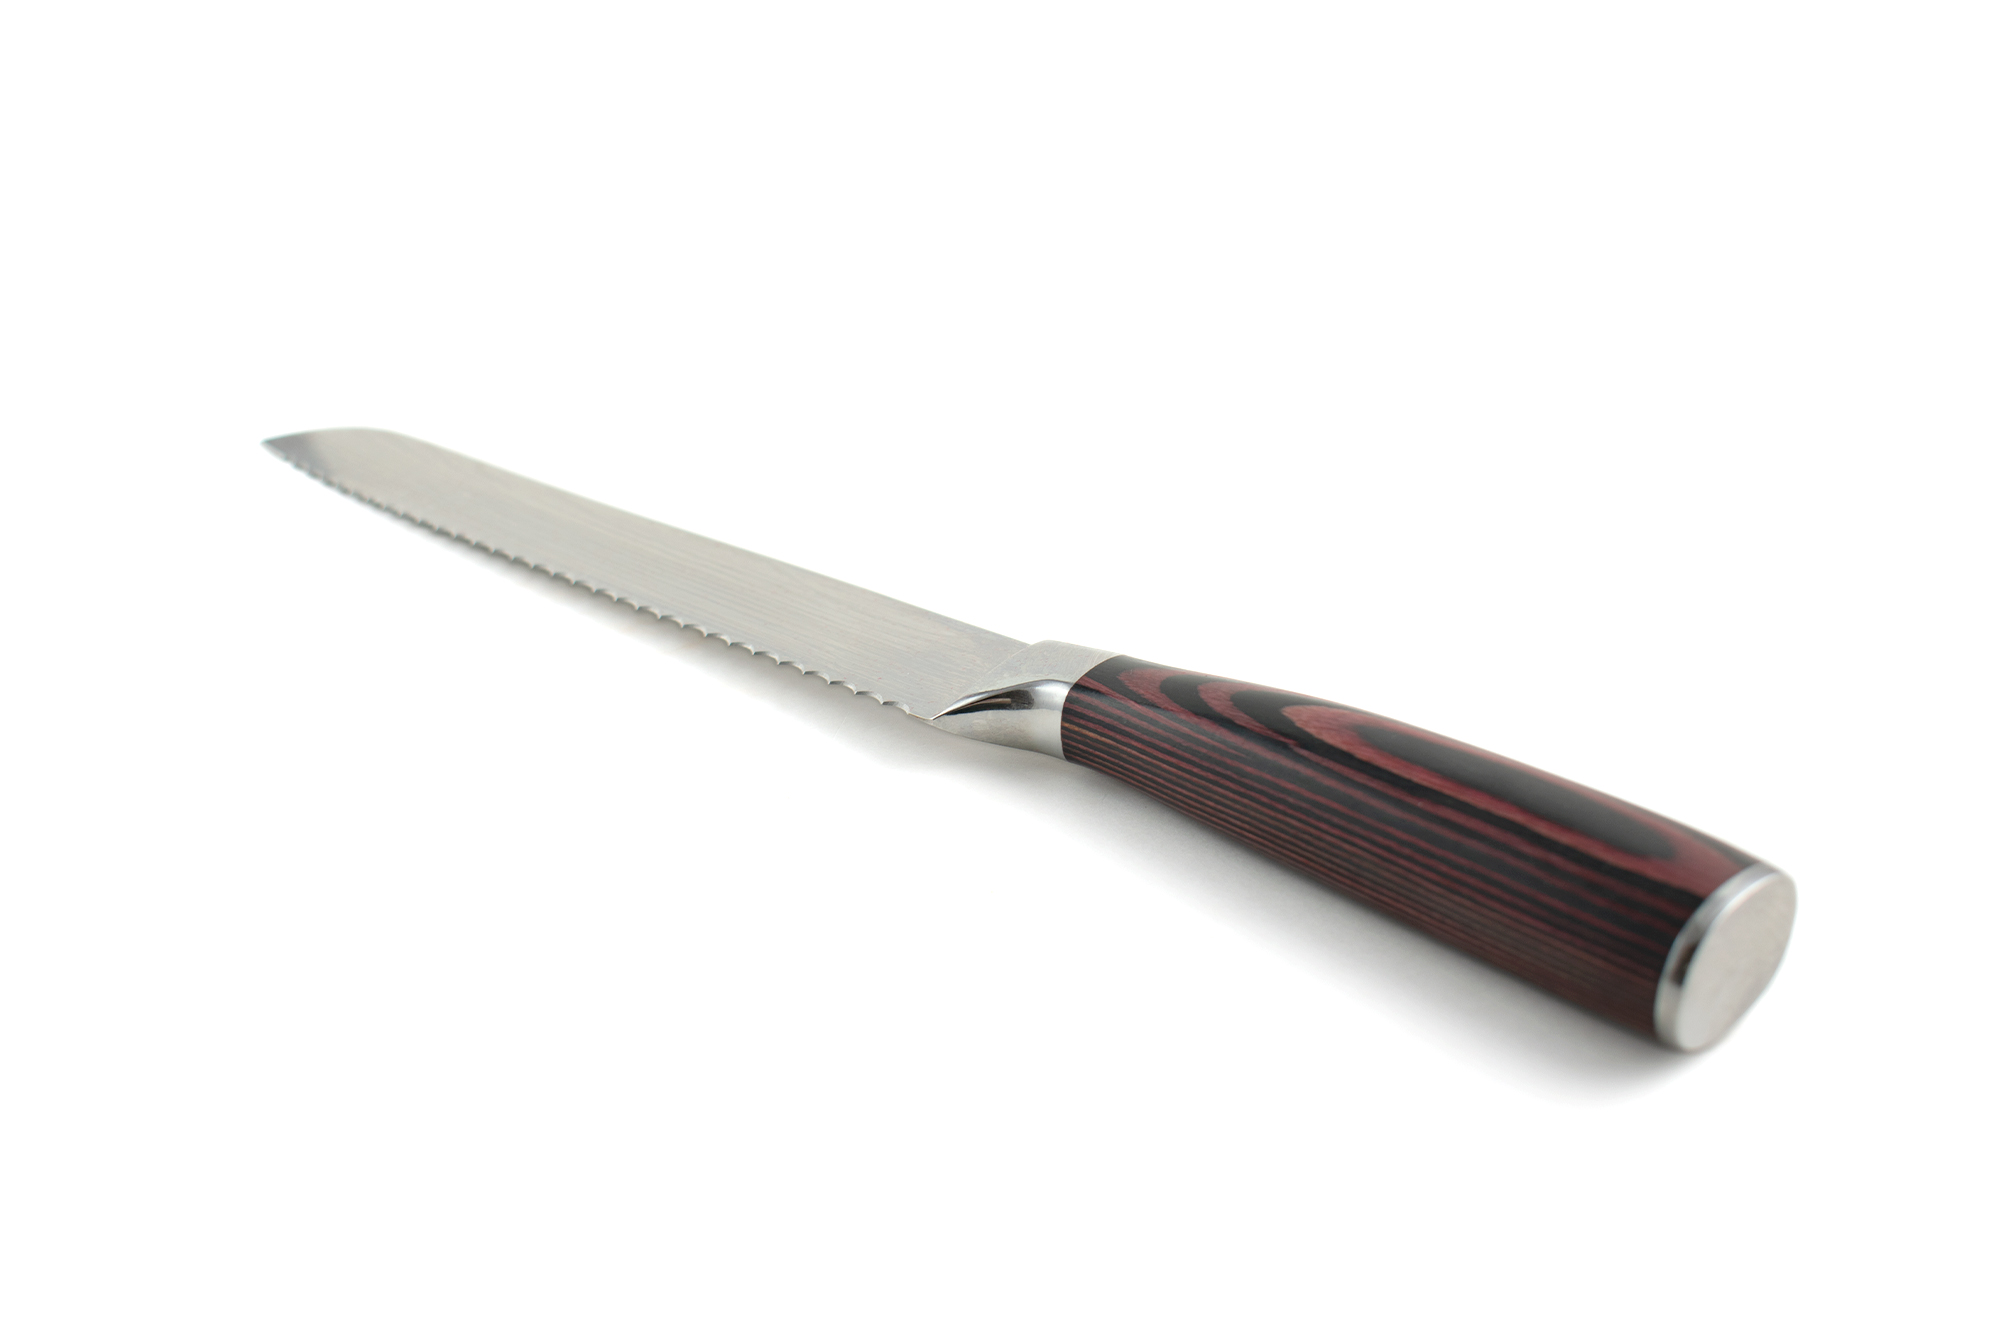 Professional stainless steel bread knife 8-inch blade & wood handle